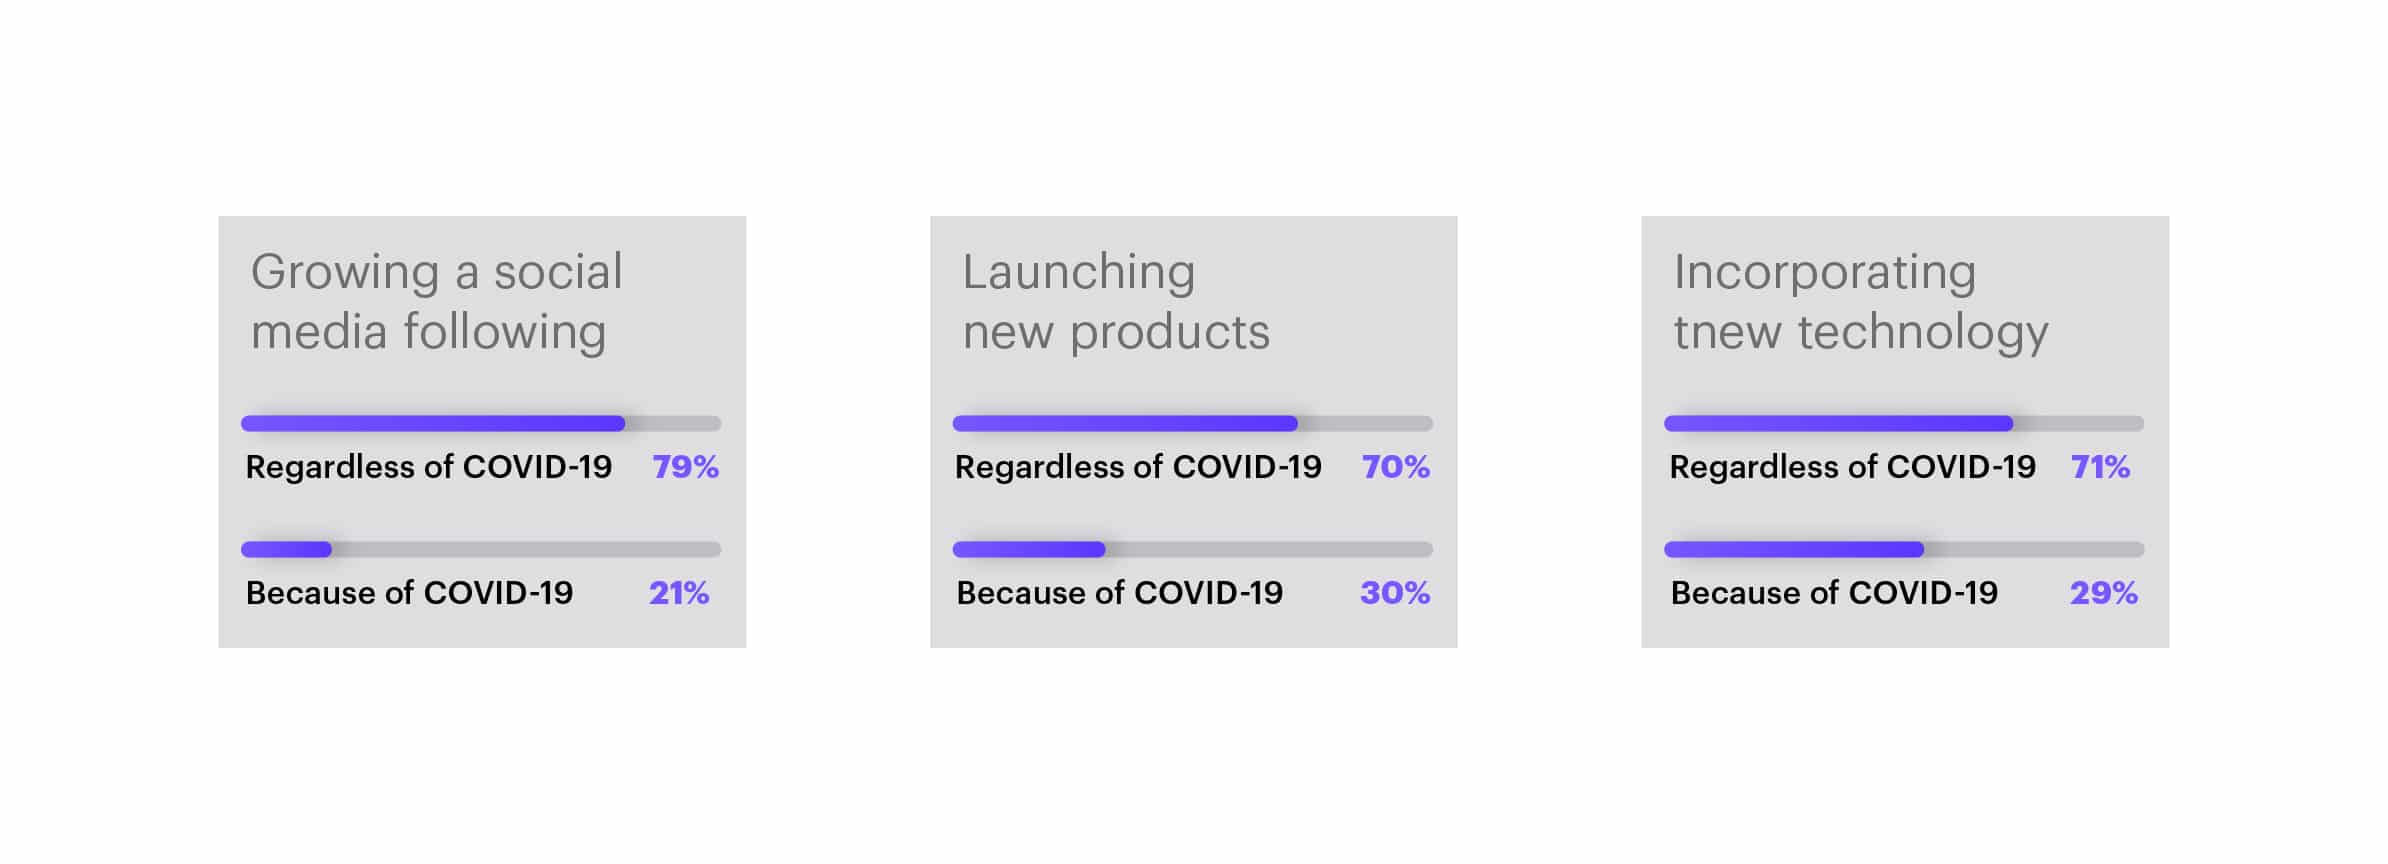 Growing a social media following: 79% said "Regardless of COVID-19" and 21% said "Because of COVID-19". Launching new products: 70% said "Regardless of COVID-19" and 30% said "Because of COVID-19." Incorporating new technology: 71% said "Regardless of COVID-19" and 29% said "Because of COVID-19."